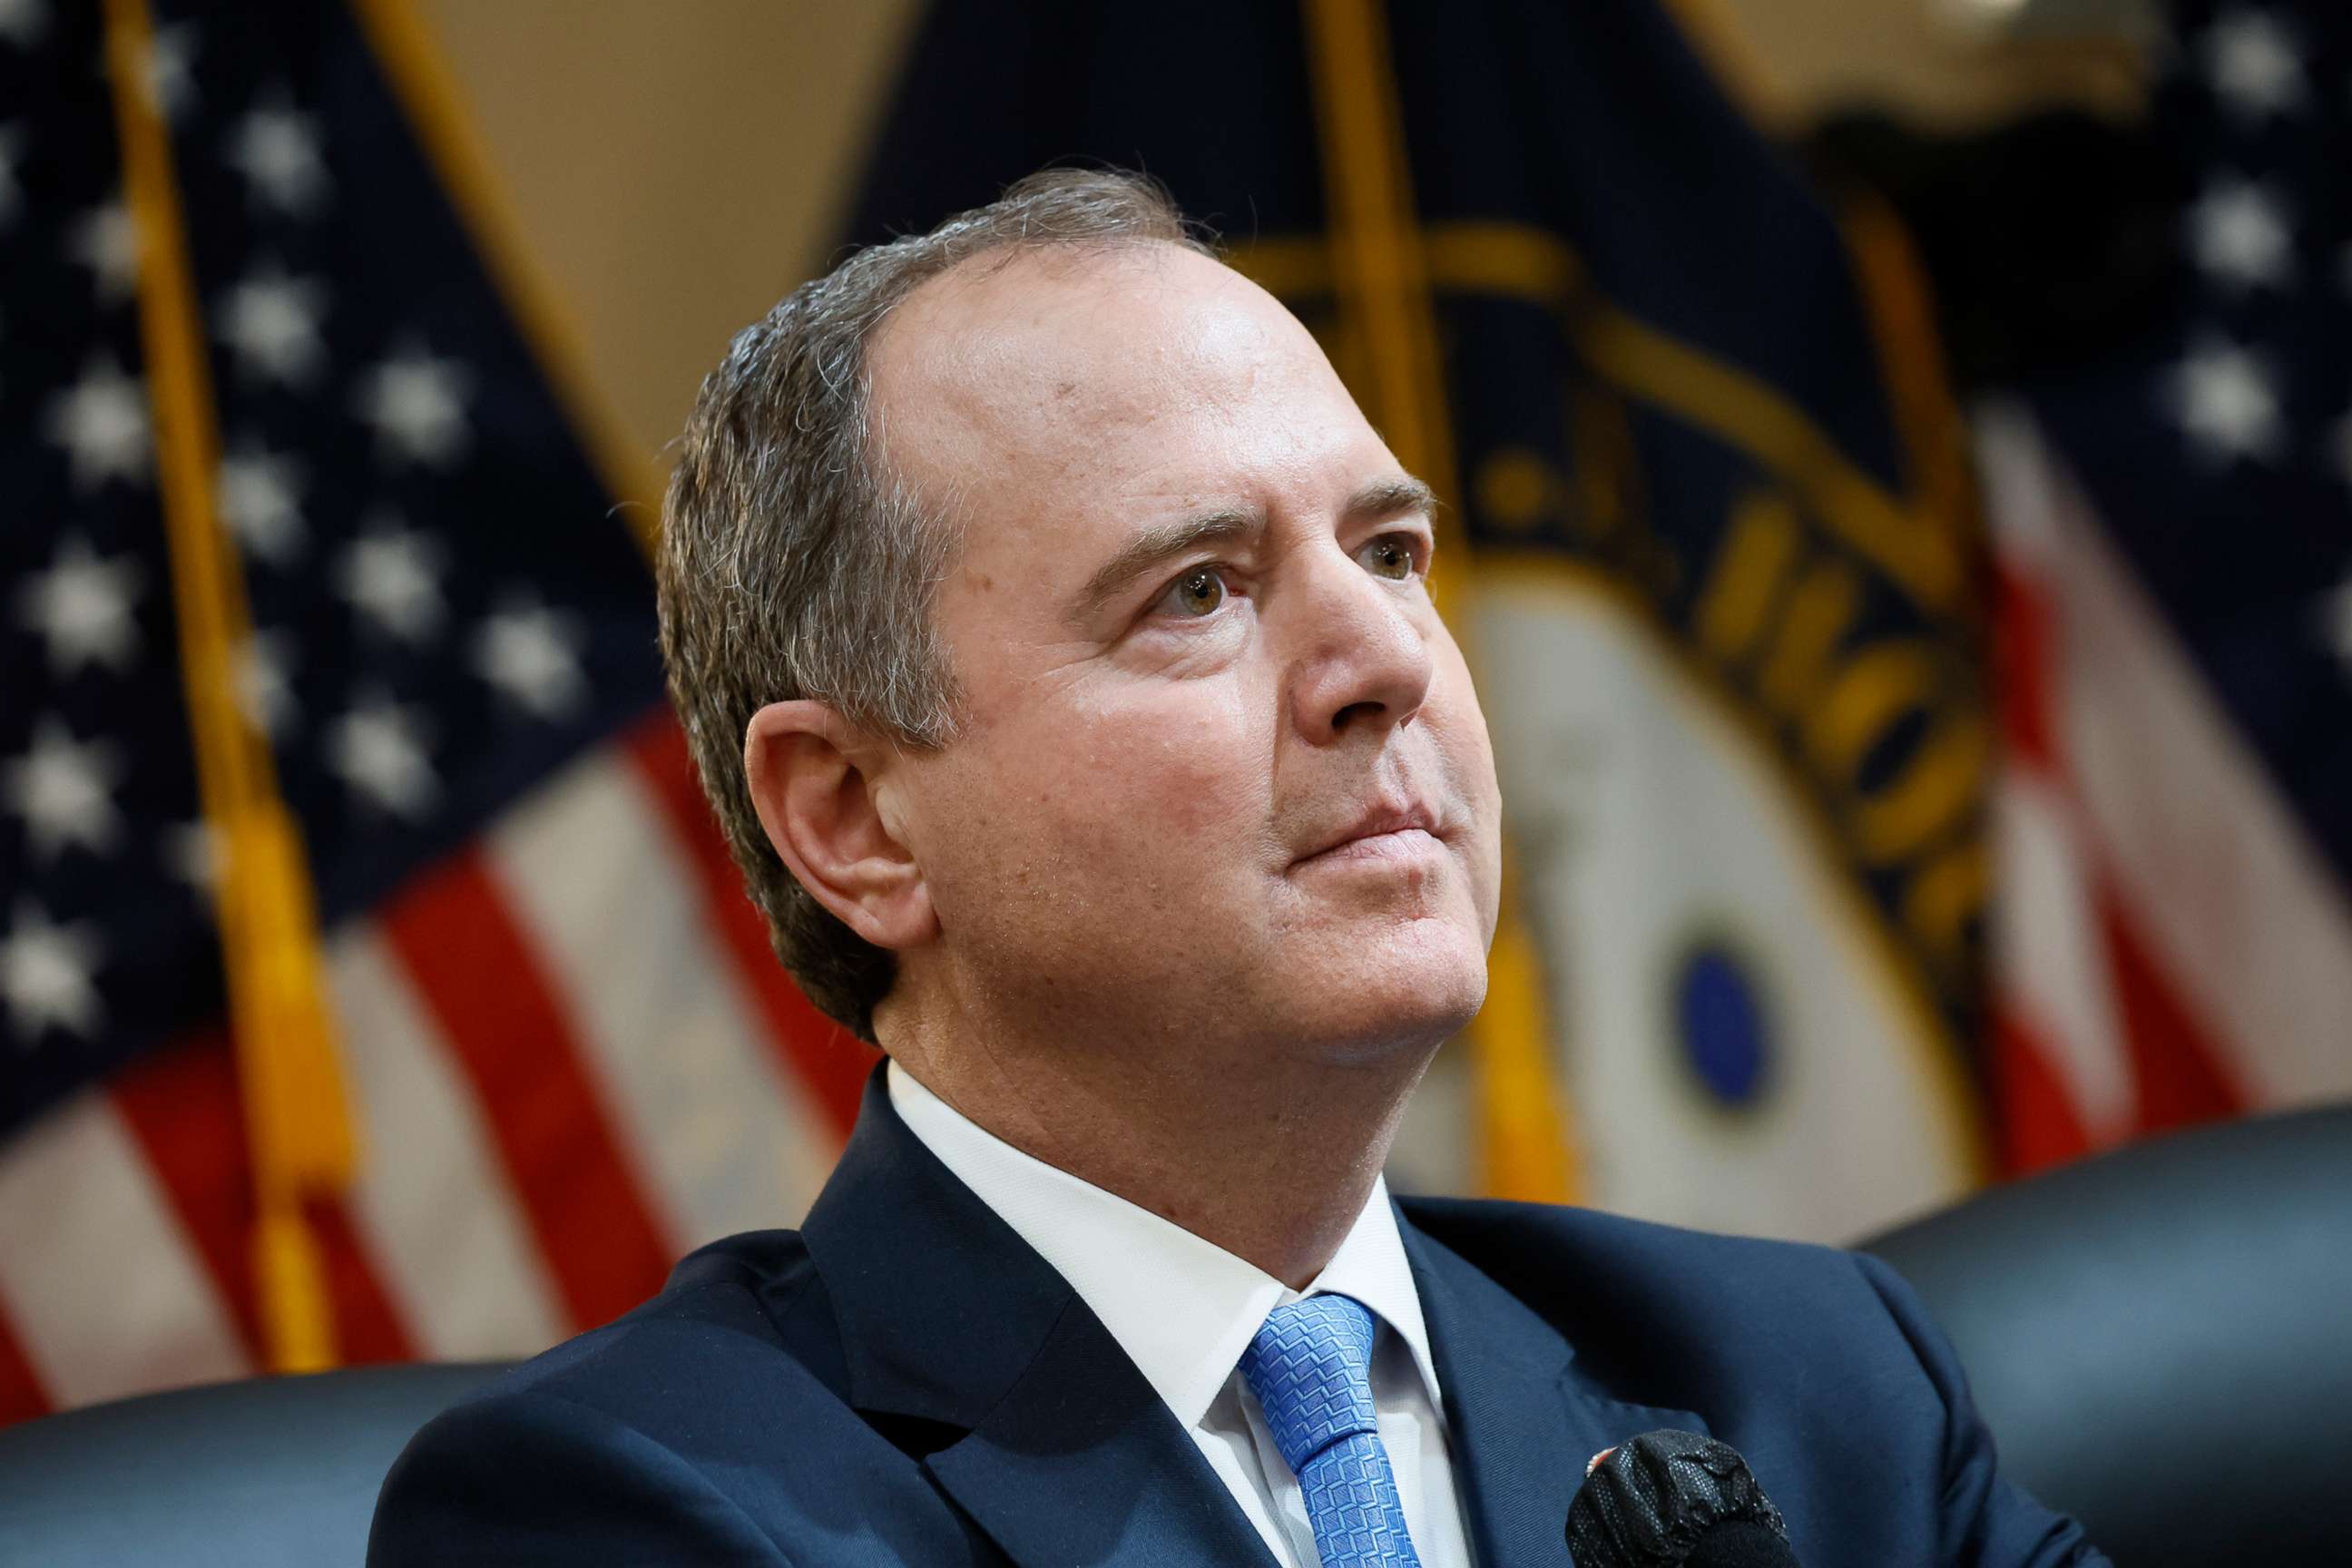 PHOTO: In this June 9, 2022, file photo, Rep. Adam Schiff listens during a hearing of the Select Committee to Investigate the January 6th Attack on the US Capitol, in Washington, D.C.